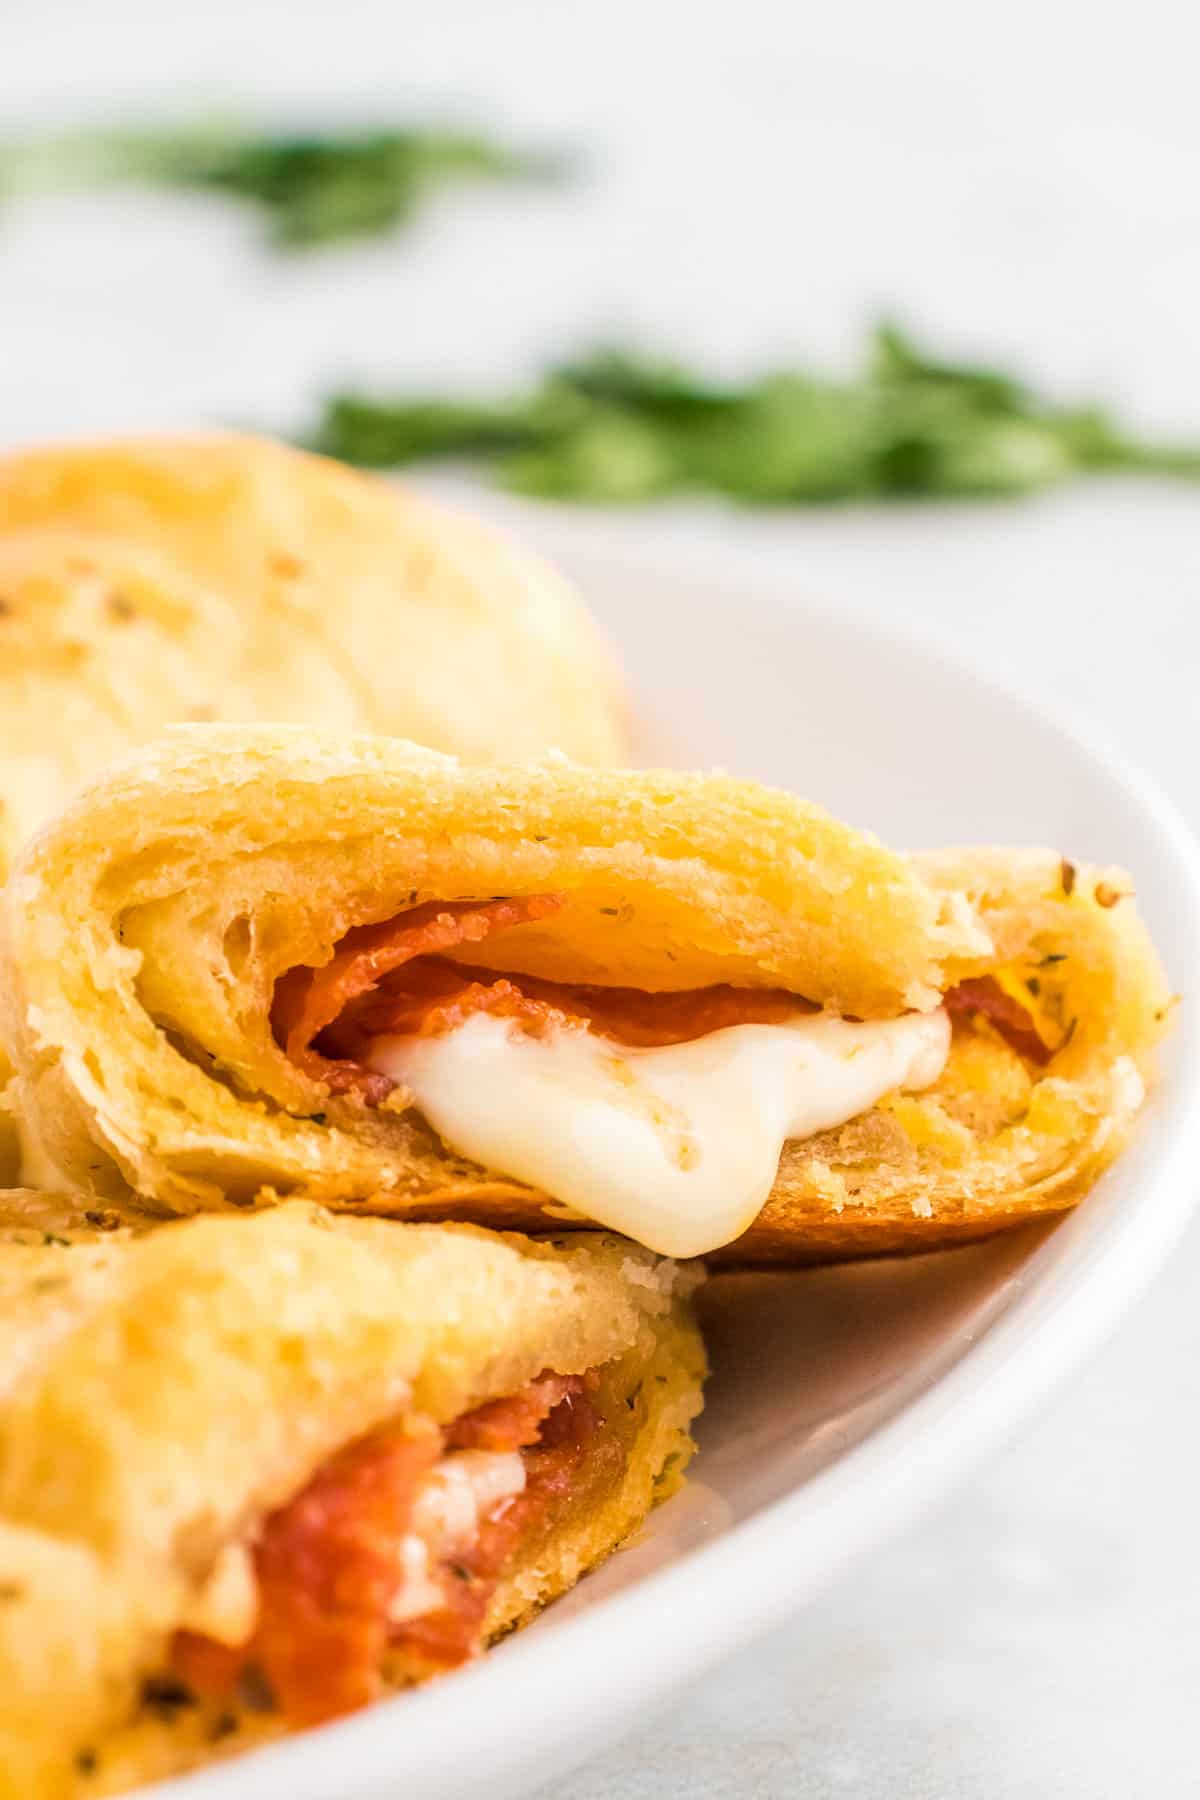 Pizza Crescent Rolls sliced open on white plate